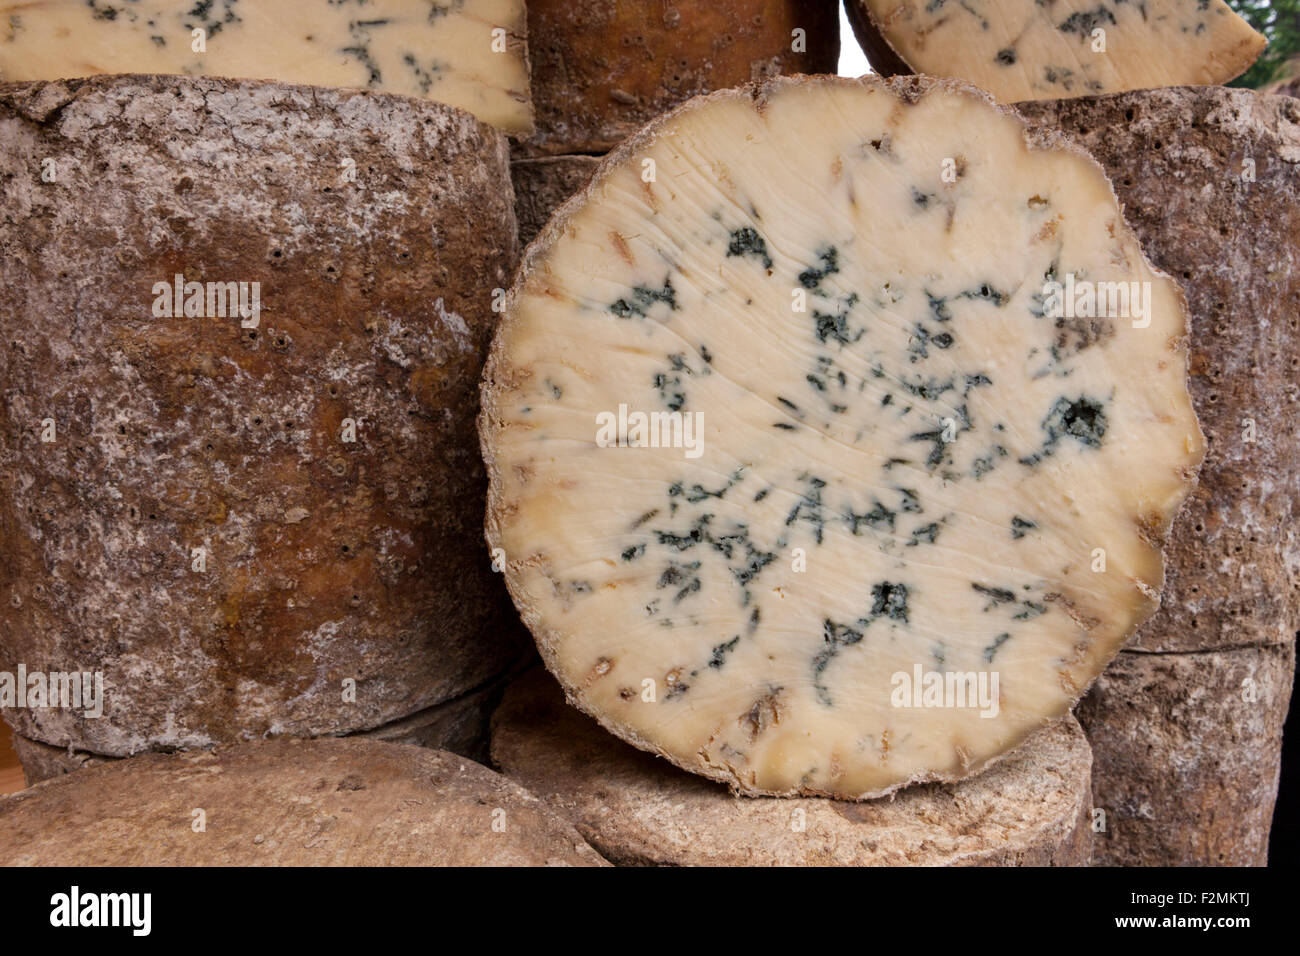 Cross section of round of Stichelton cheese, a veined, Stilton-like blue cheese on sale in Borough Market, South Bank London, UK Stock Photo